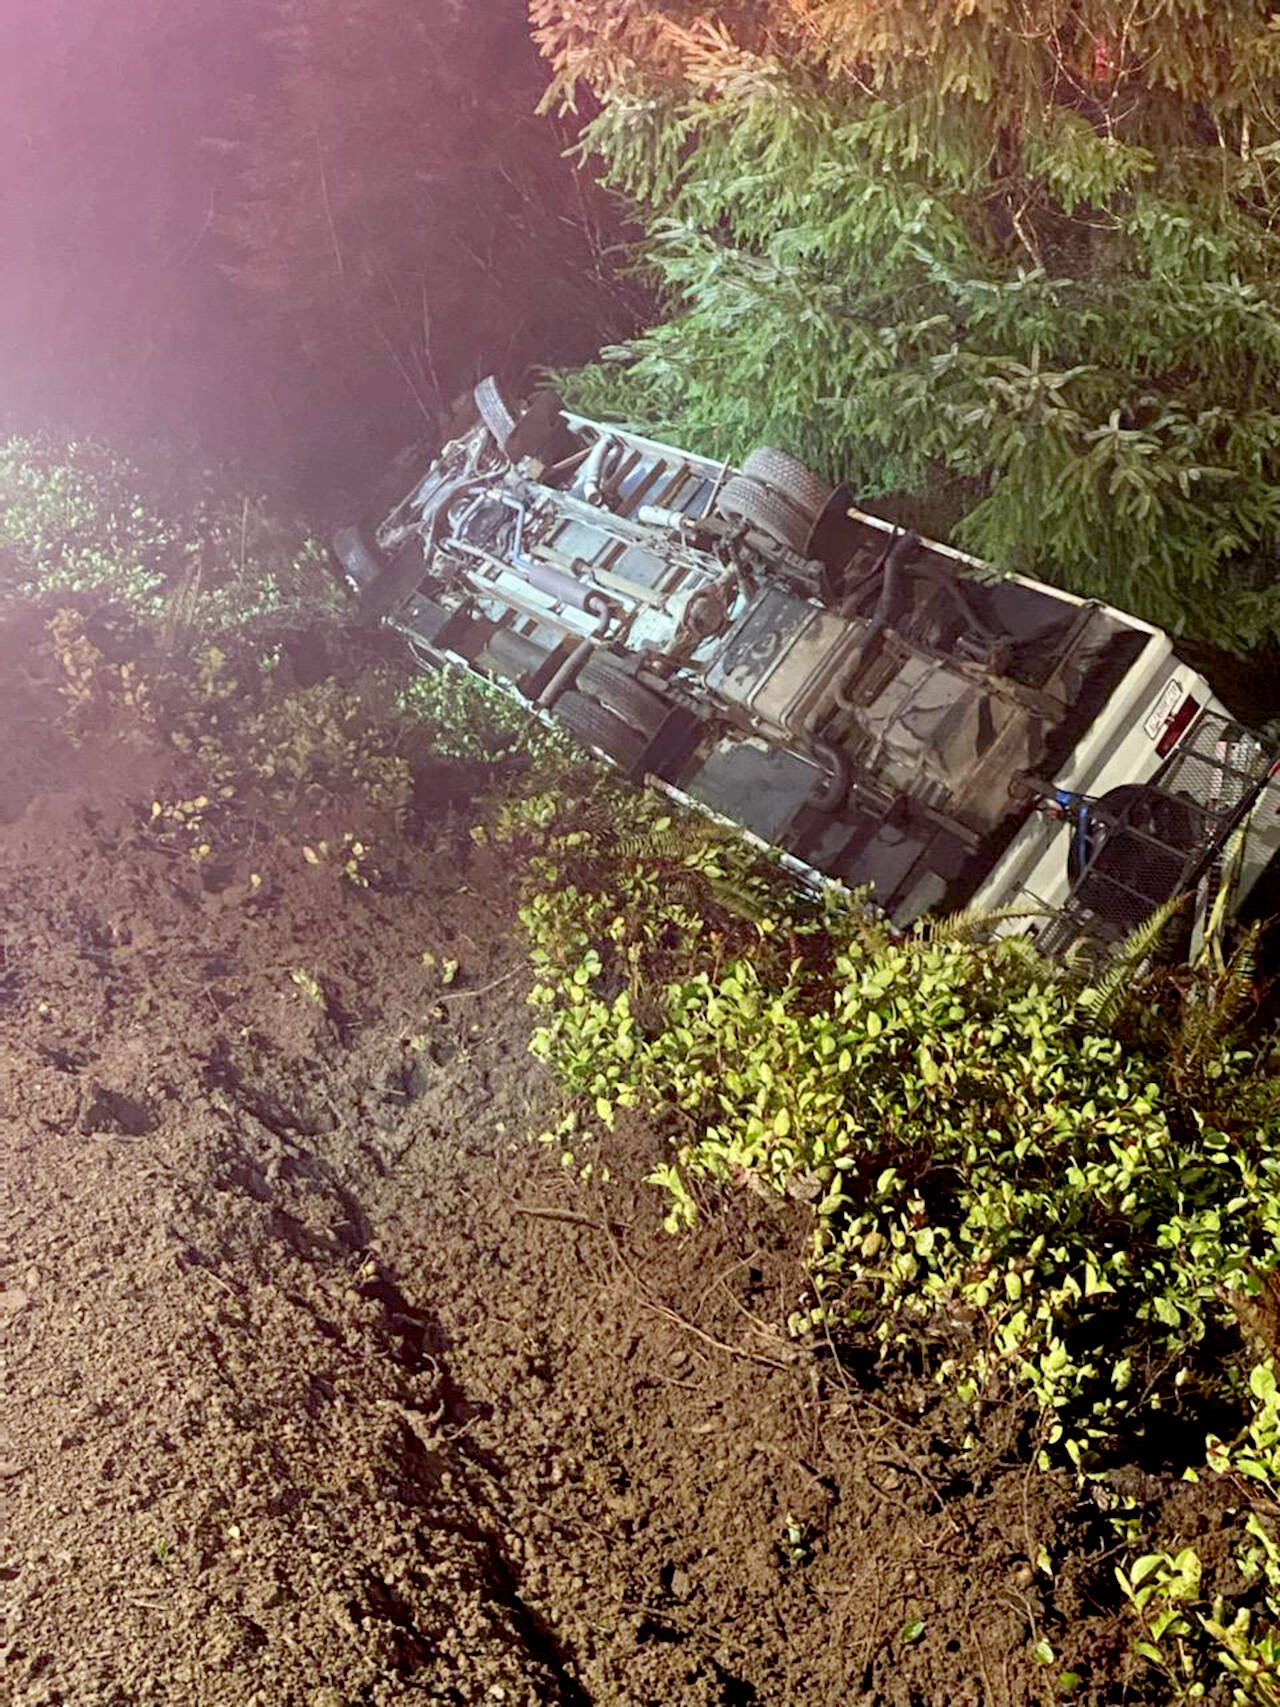 A man was treated and discharged form a Seattle hospital after a rollover on U.S. Highway 101 in West Jefferson County. (Forks Fire Department)